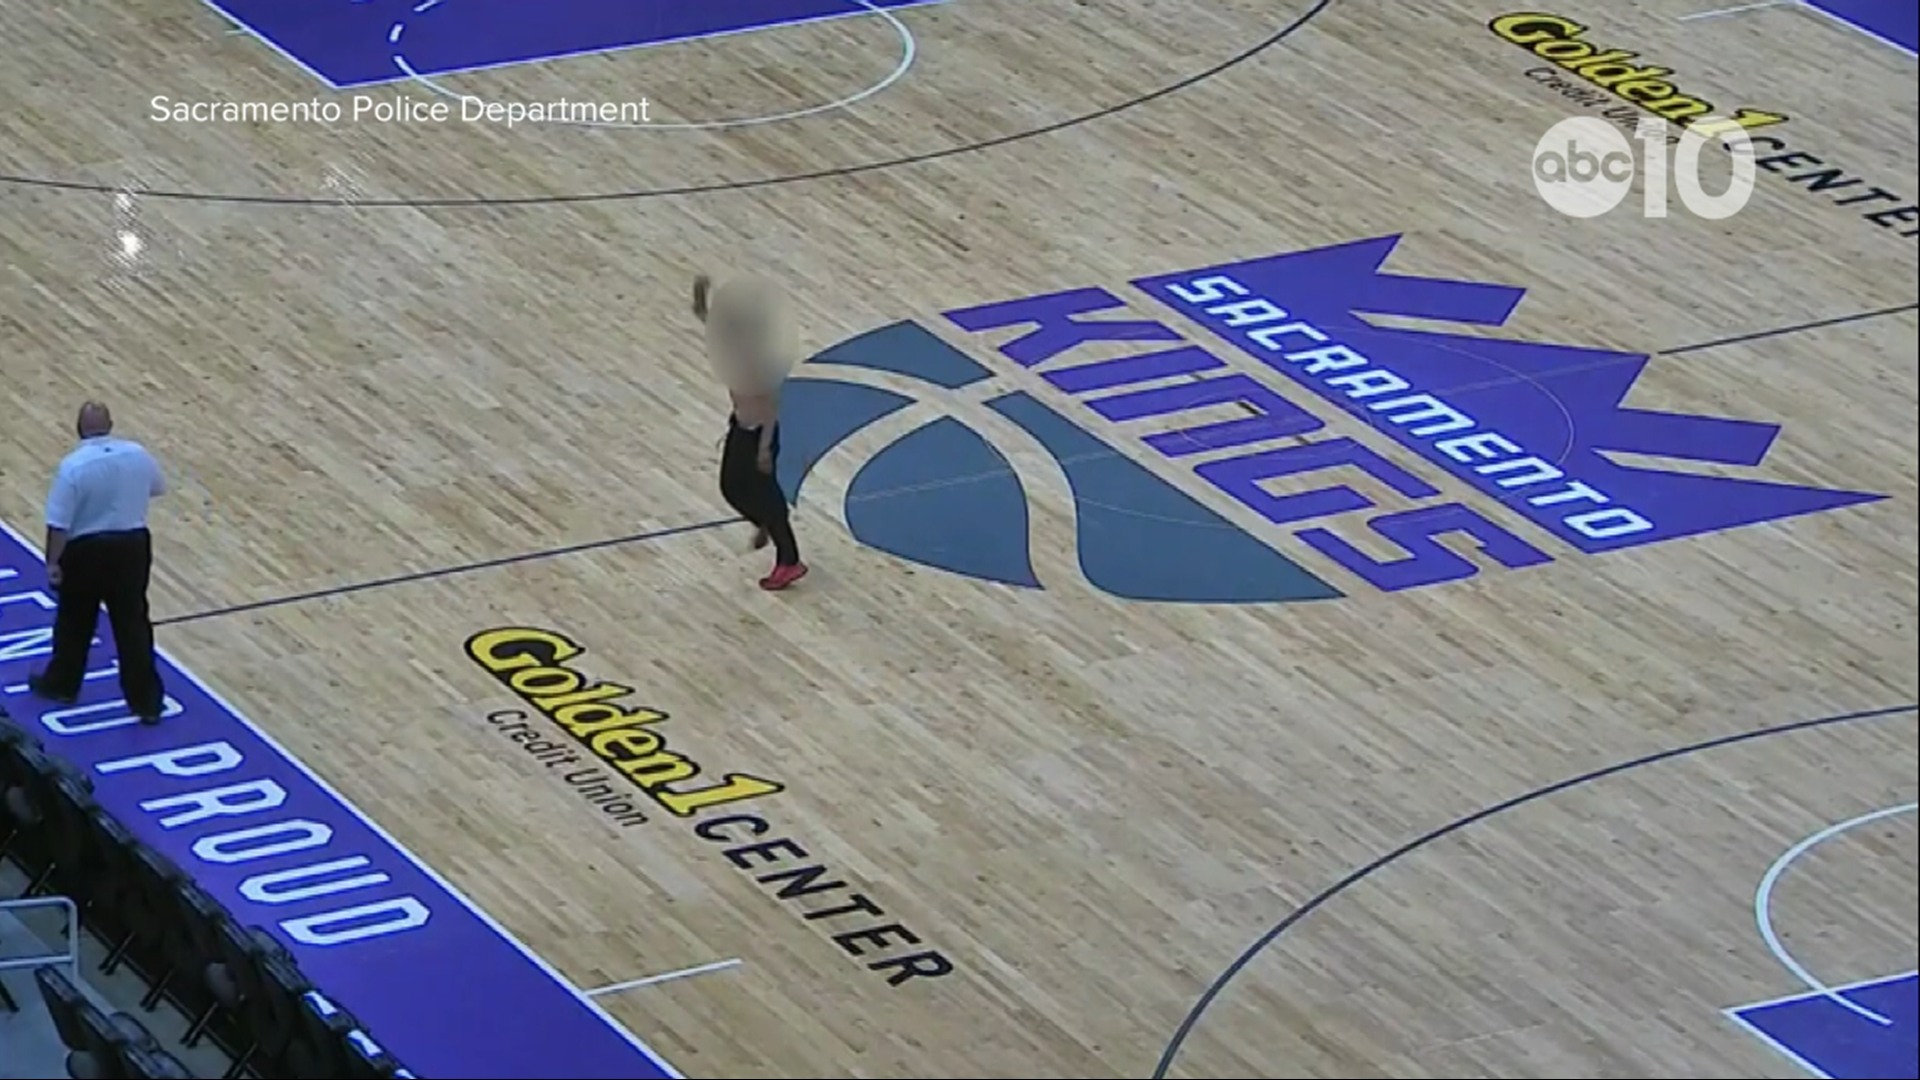 Video from police bodycams and arena surveillance camera showed some of what happened when a trespasser made it into the Golden 1 Center in early July.